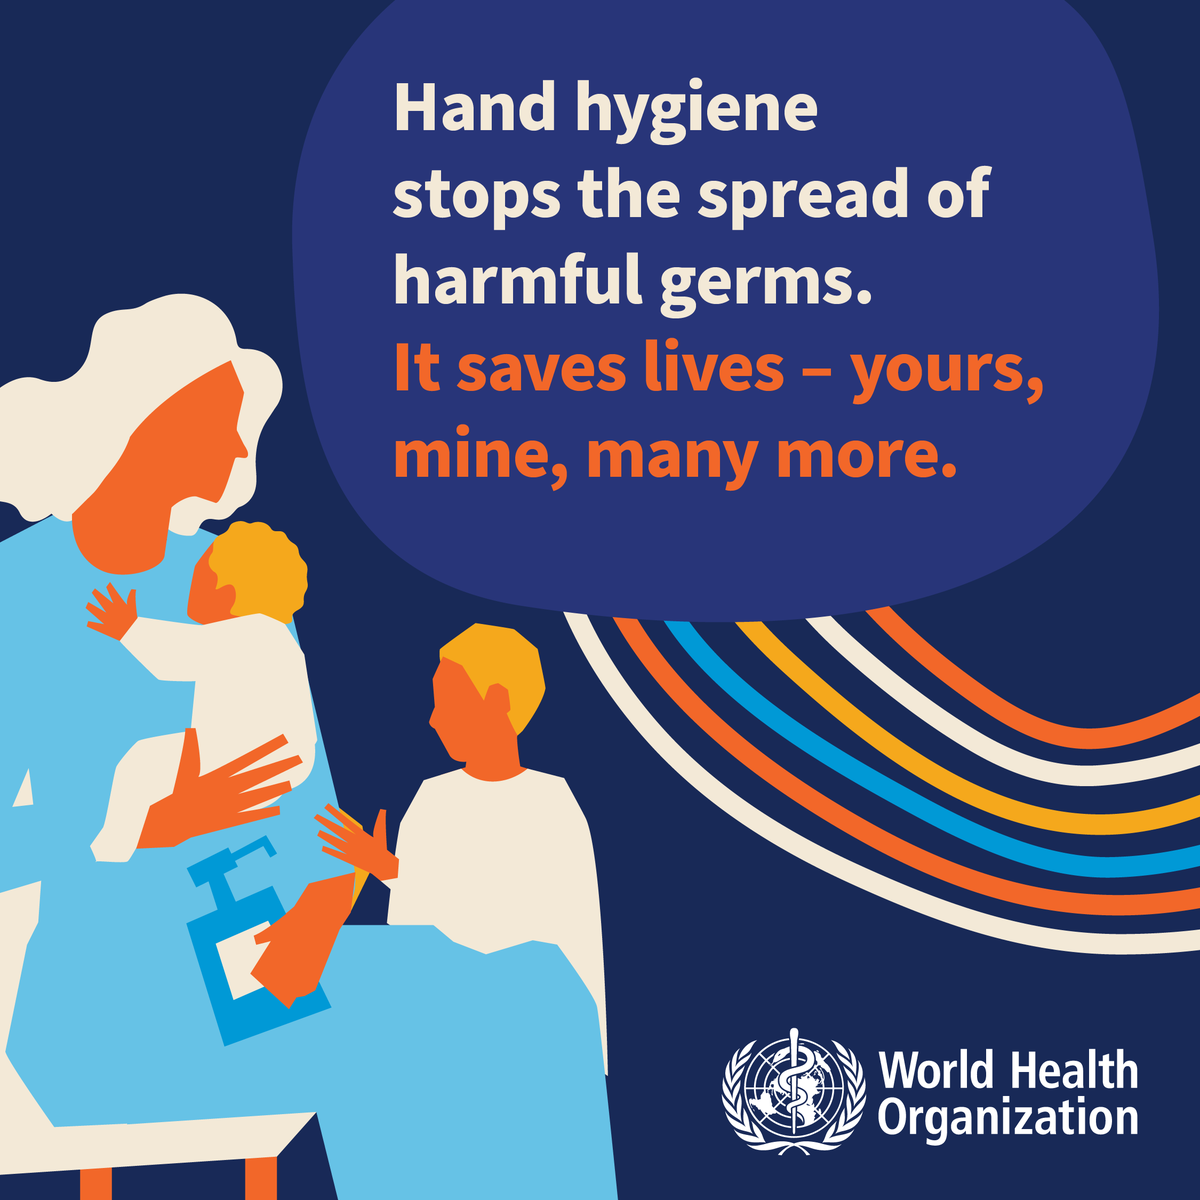 Hand hygiene is one of the most effective interventions for health. To wash your hands properly, use clean water and soap 💧🧼for at least 40-60 seconds, or an alcohol-based handrub. Clean your hands, and save lives. #WorldHandHygieneDay